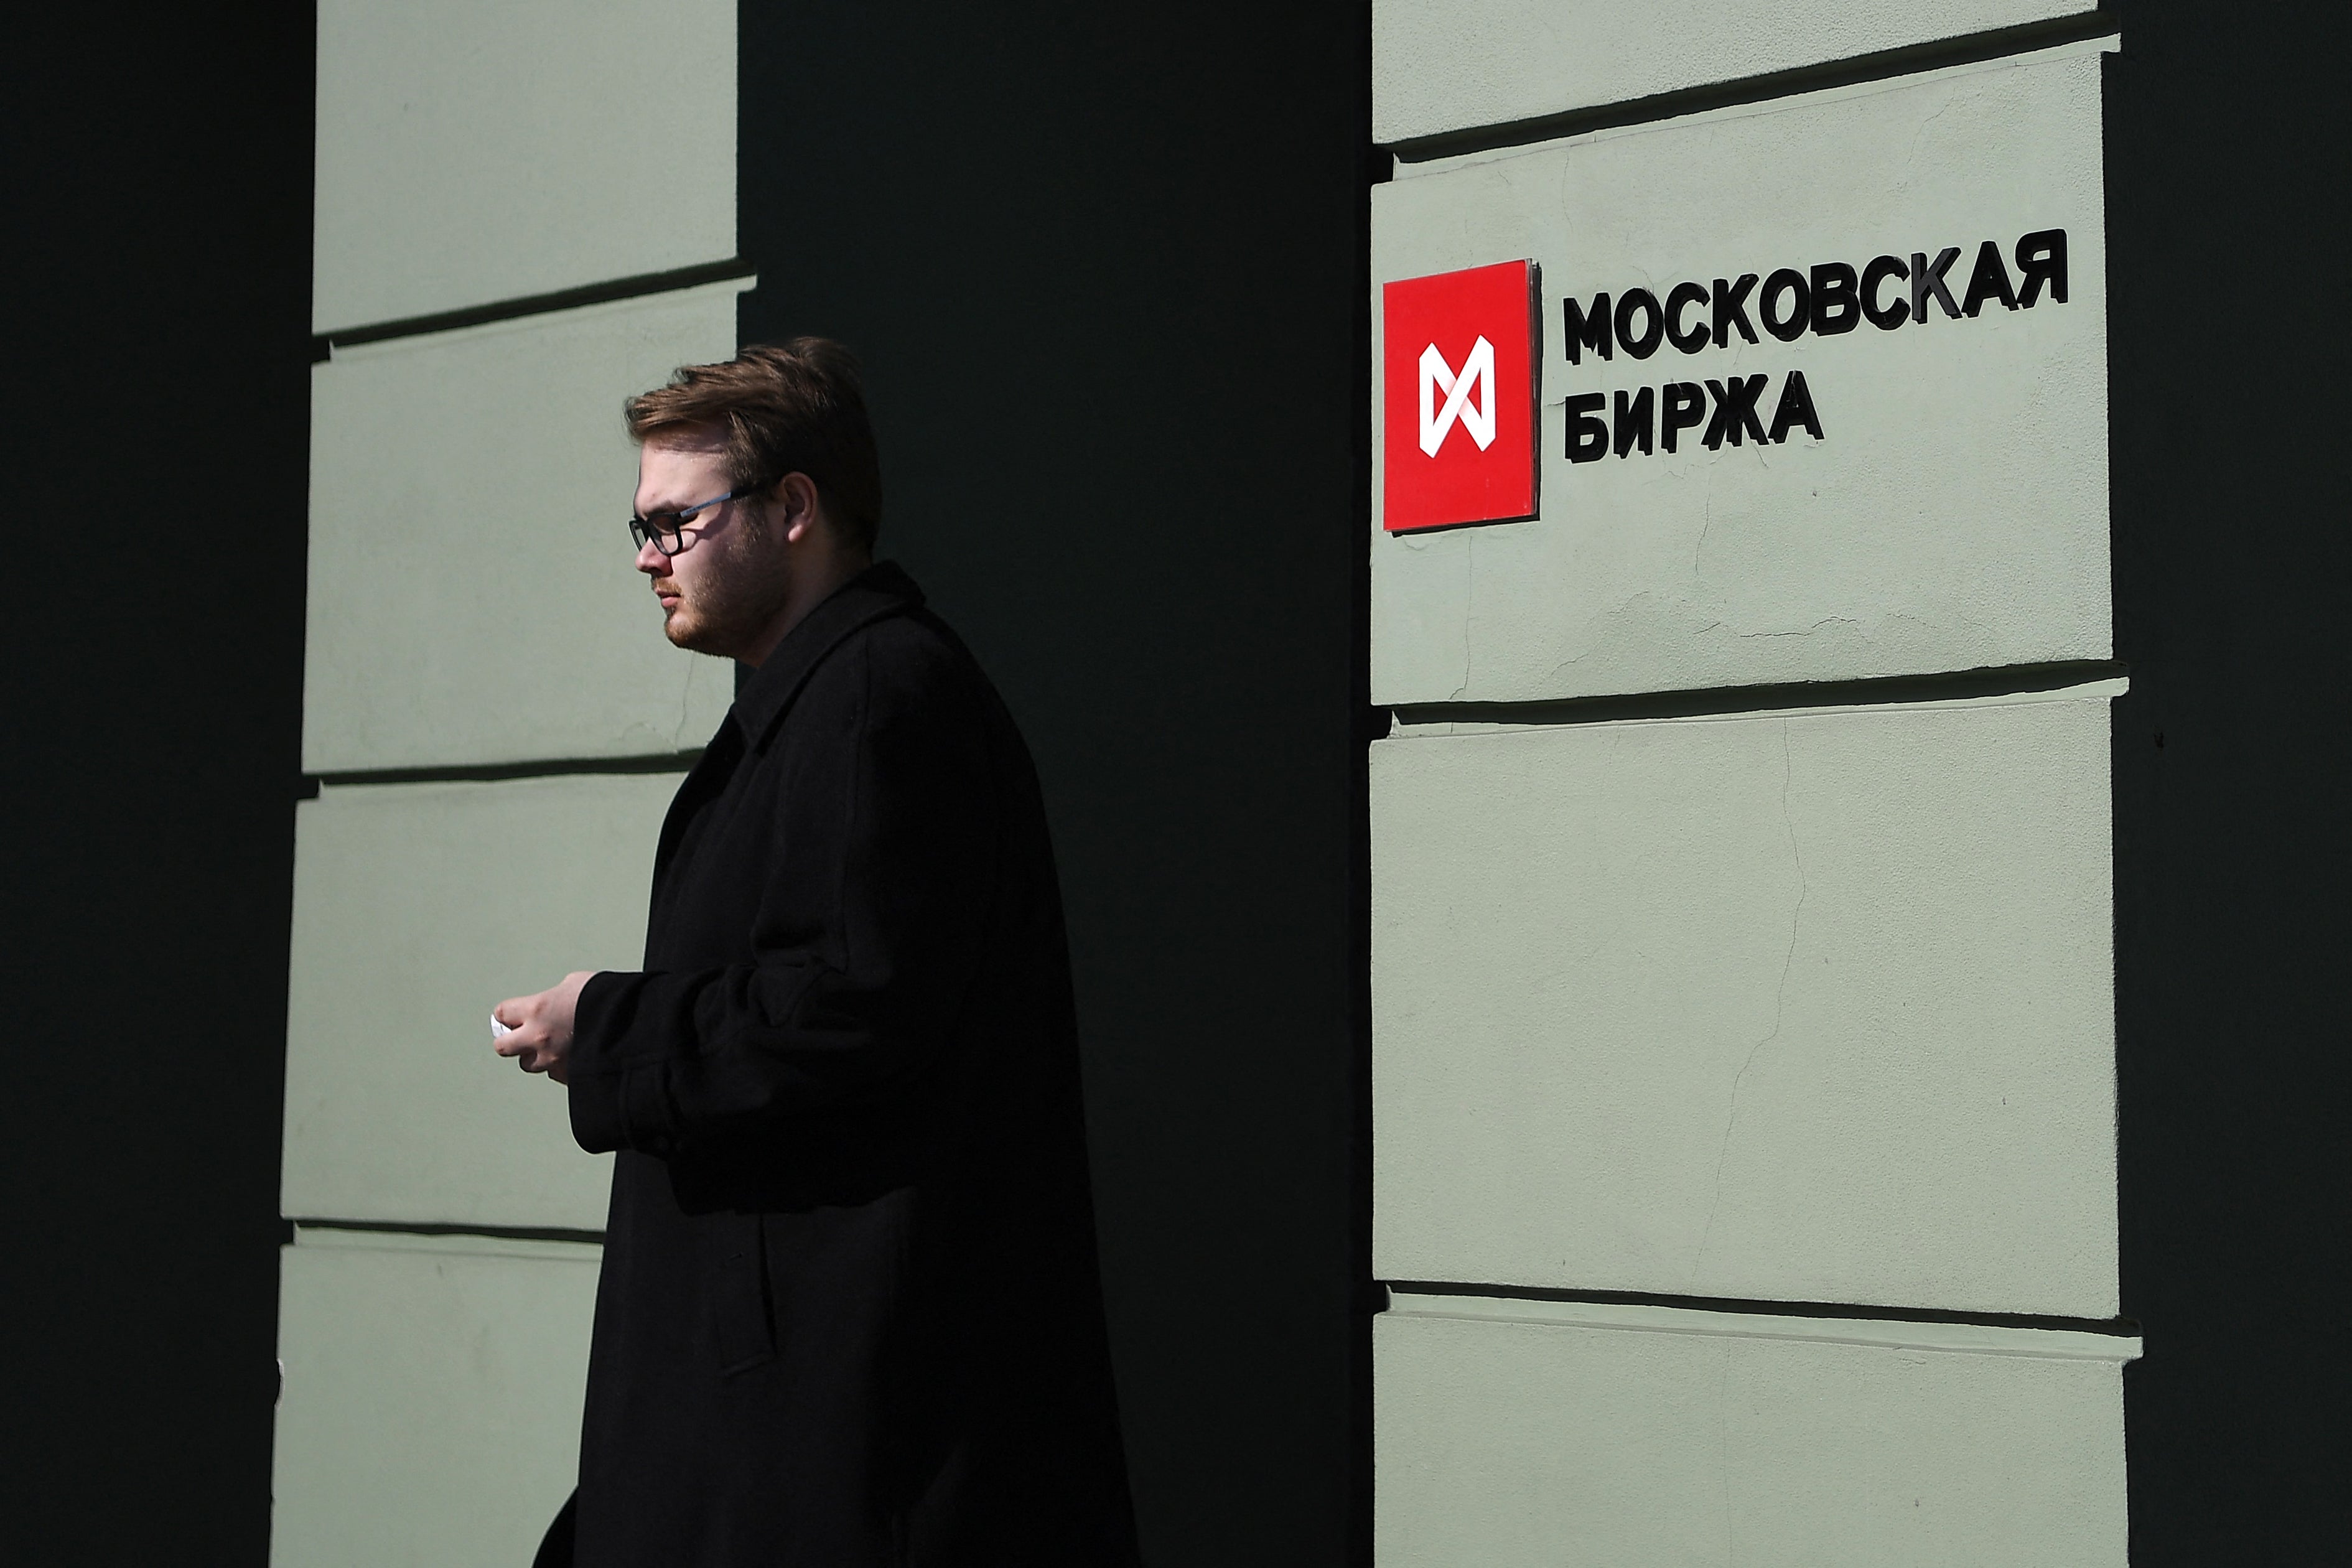 The Moscow Stock Exchange resumed trading of some shares on March 24, the second stage in a phased re-opening